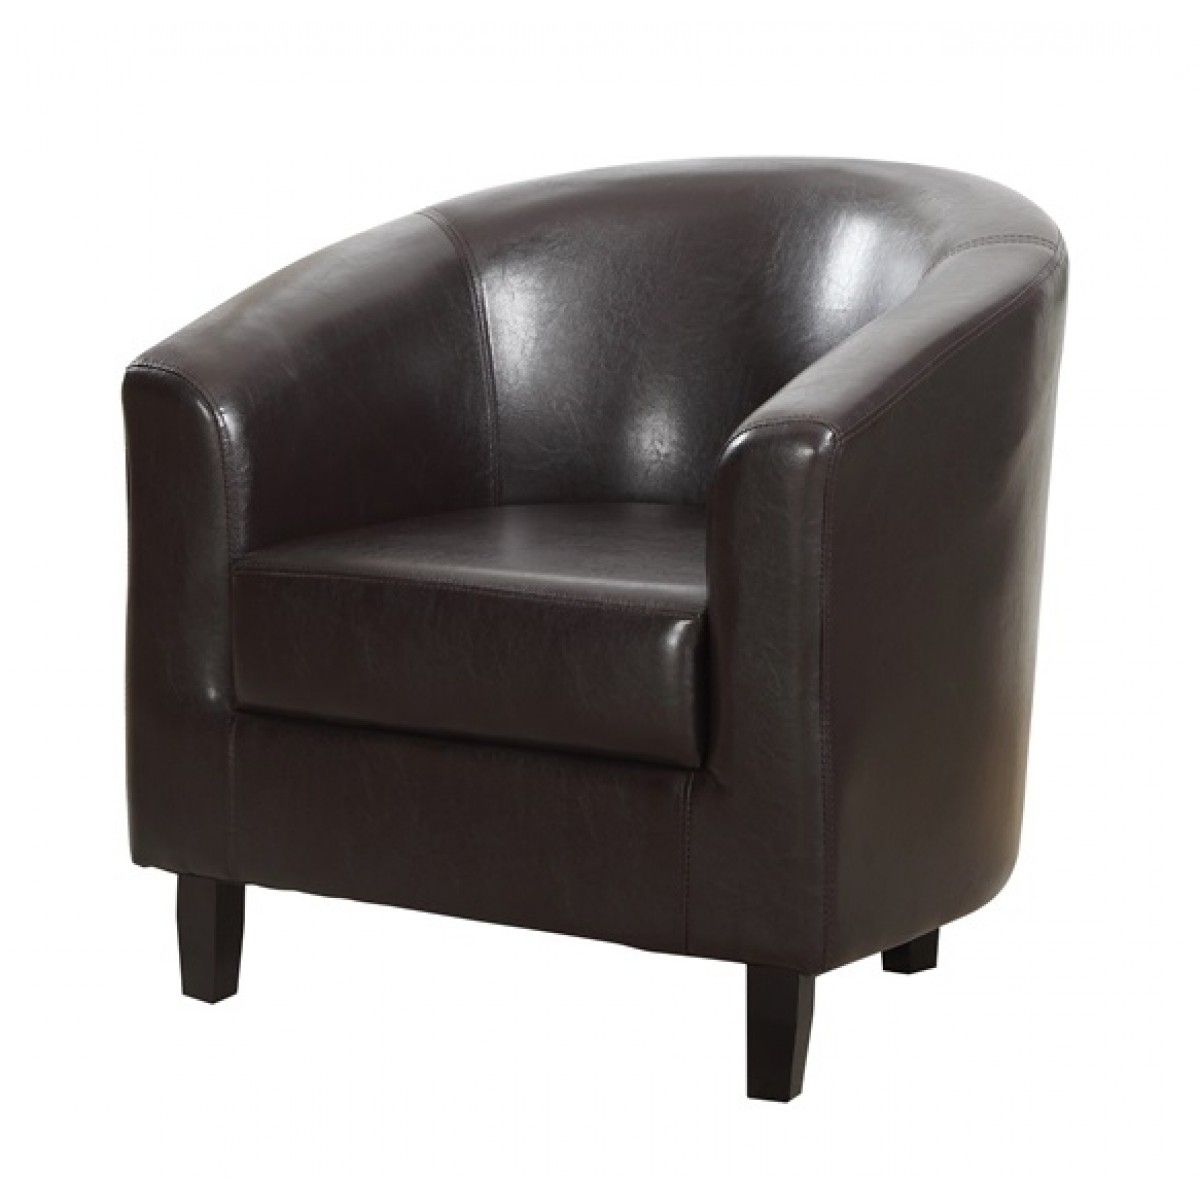 Lpd Faux Leather Tub Chair – Black, Brown Or Taupe Throughout 2019 Faux Leather Barrel Chairs (View 5 of 20)